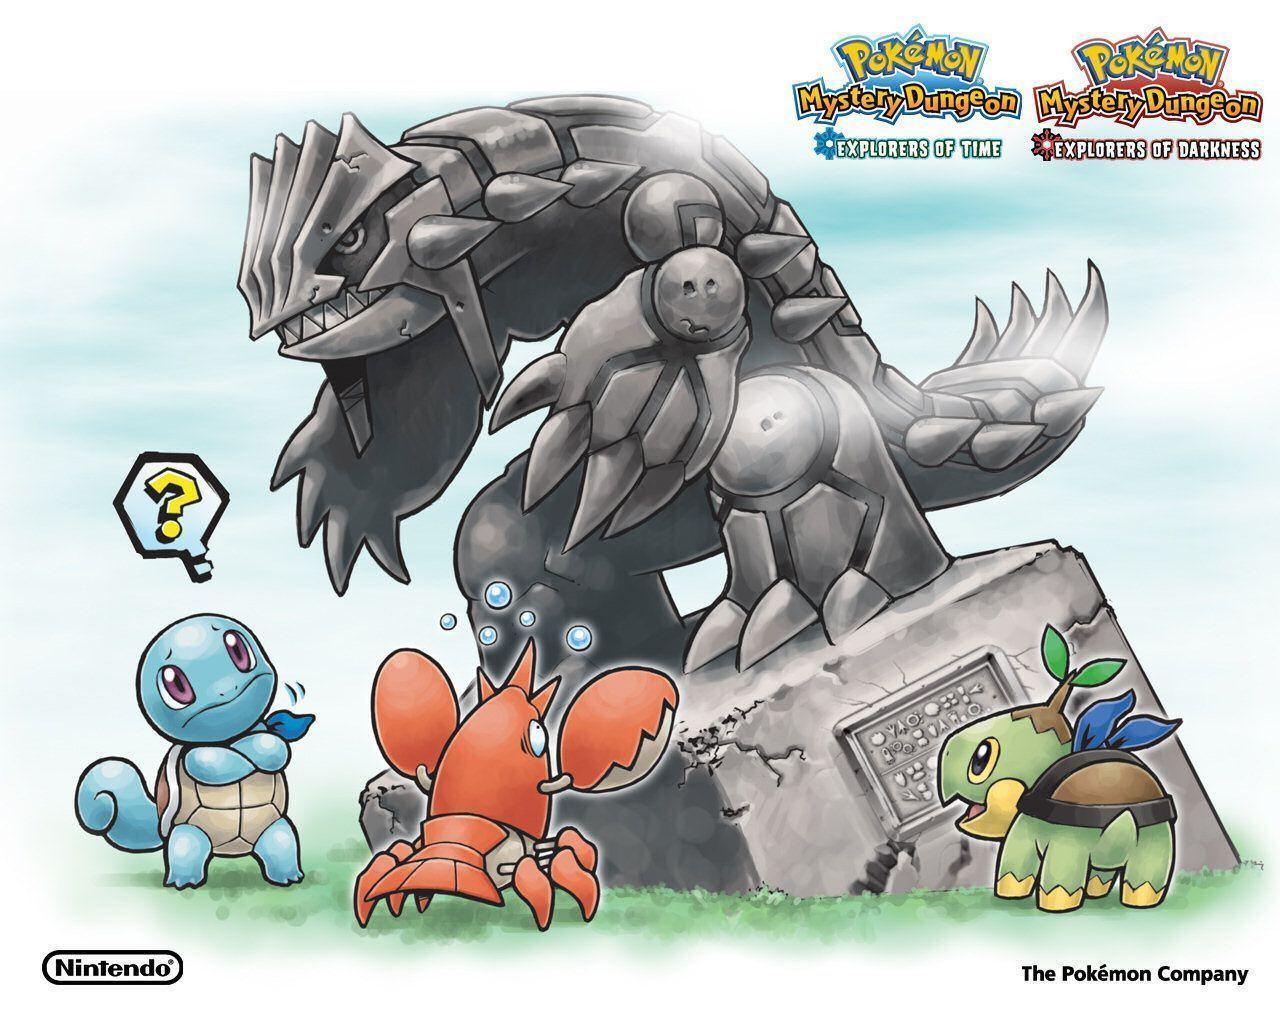 10 Latest Pokemon Mystery Dungeon Wallpaper FULL HD 19201080 For PC  Desktop  Pokemon dungeon Pokemon Pokémon super mystery dungeon